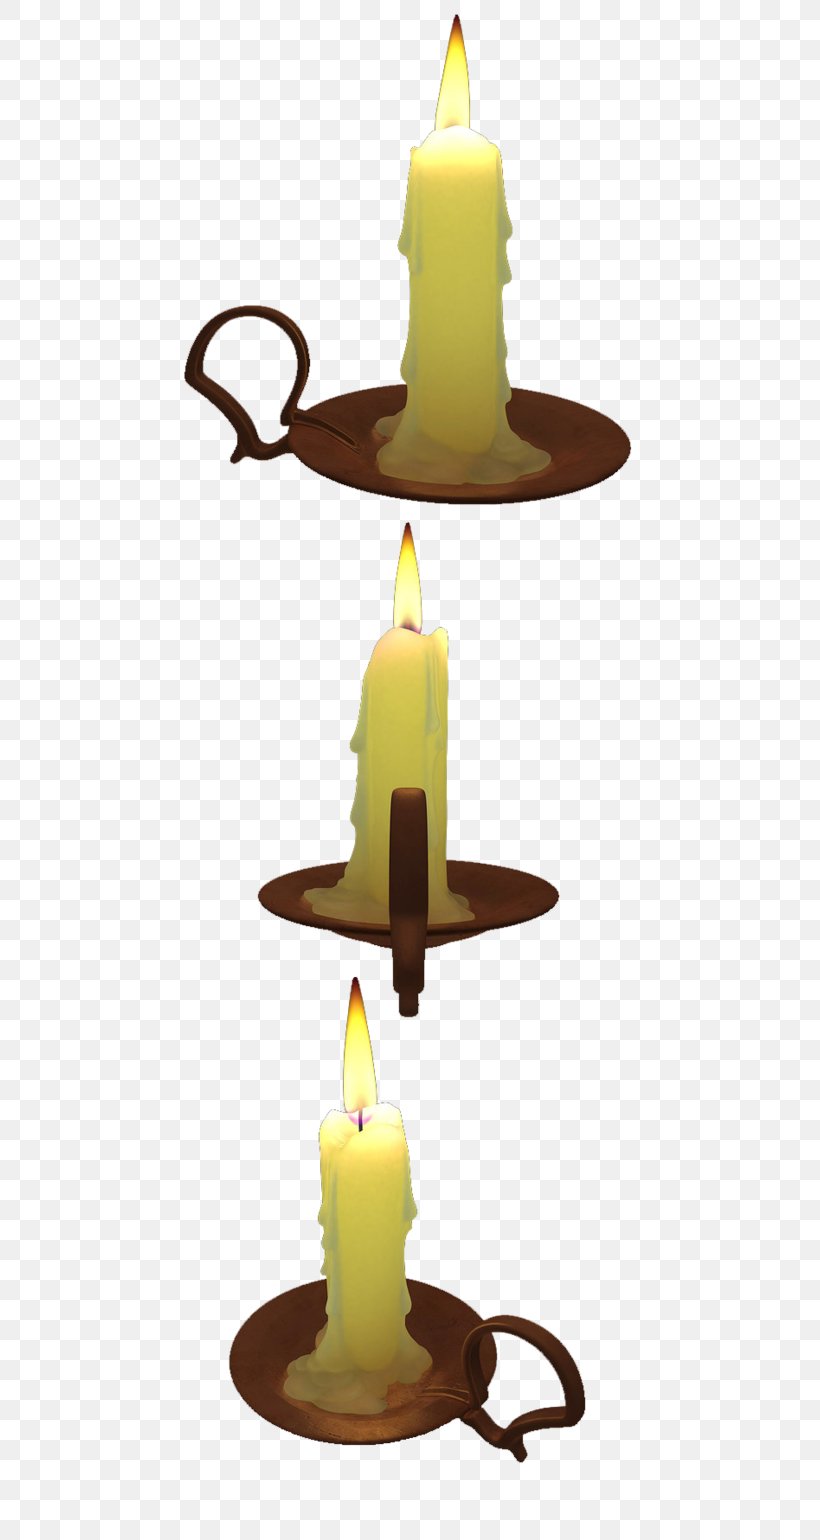 Candlestick Lamp, PNG, 519x1540px, Candle, Candle Holder, Candlestick, Decor, Lamp Download Free